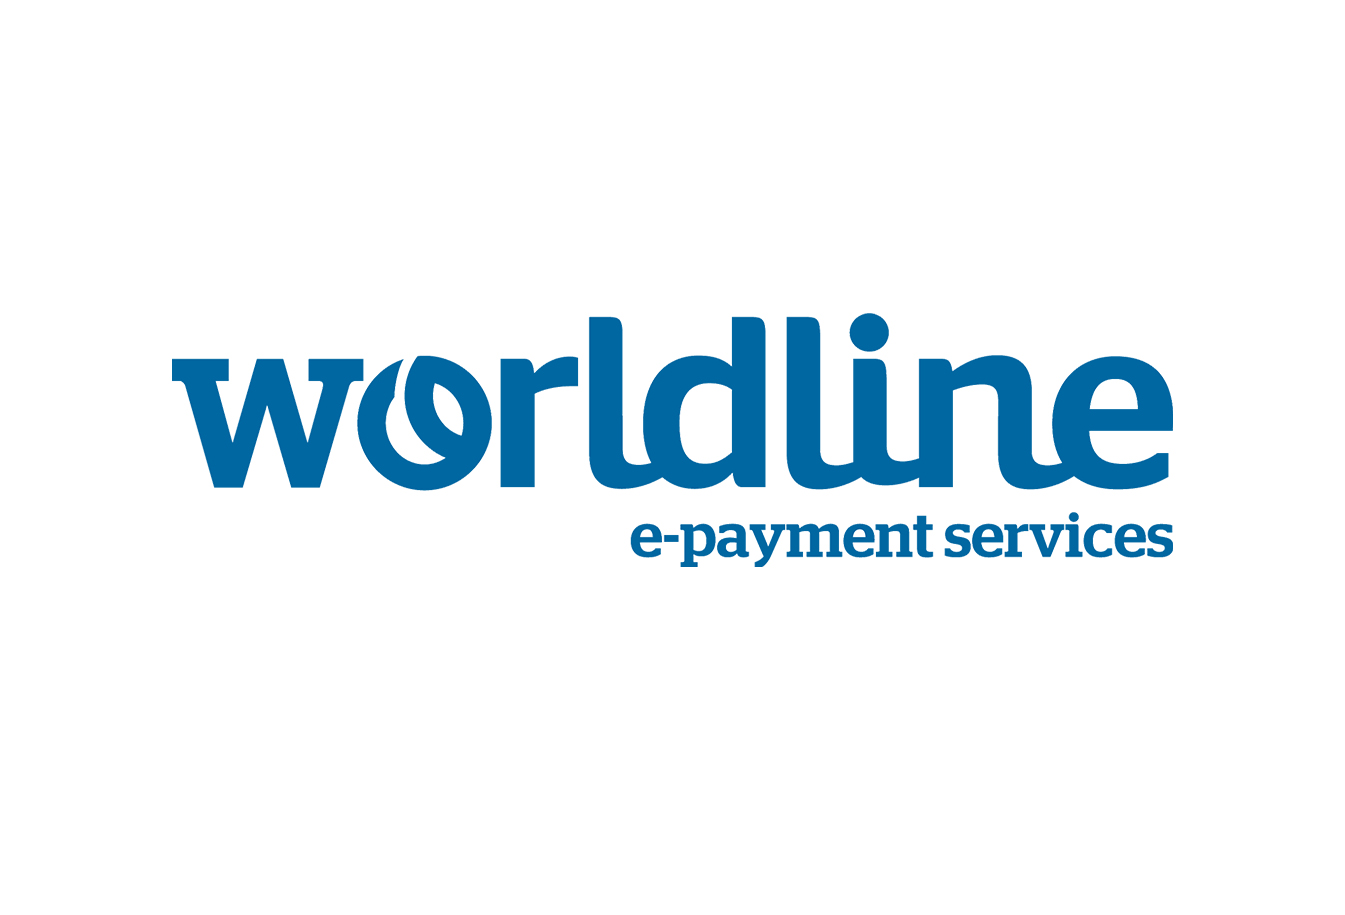 NewCo further expands Contact Center Services for Worldline